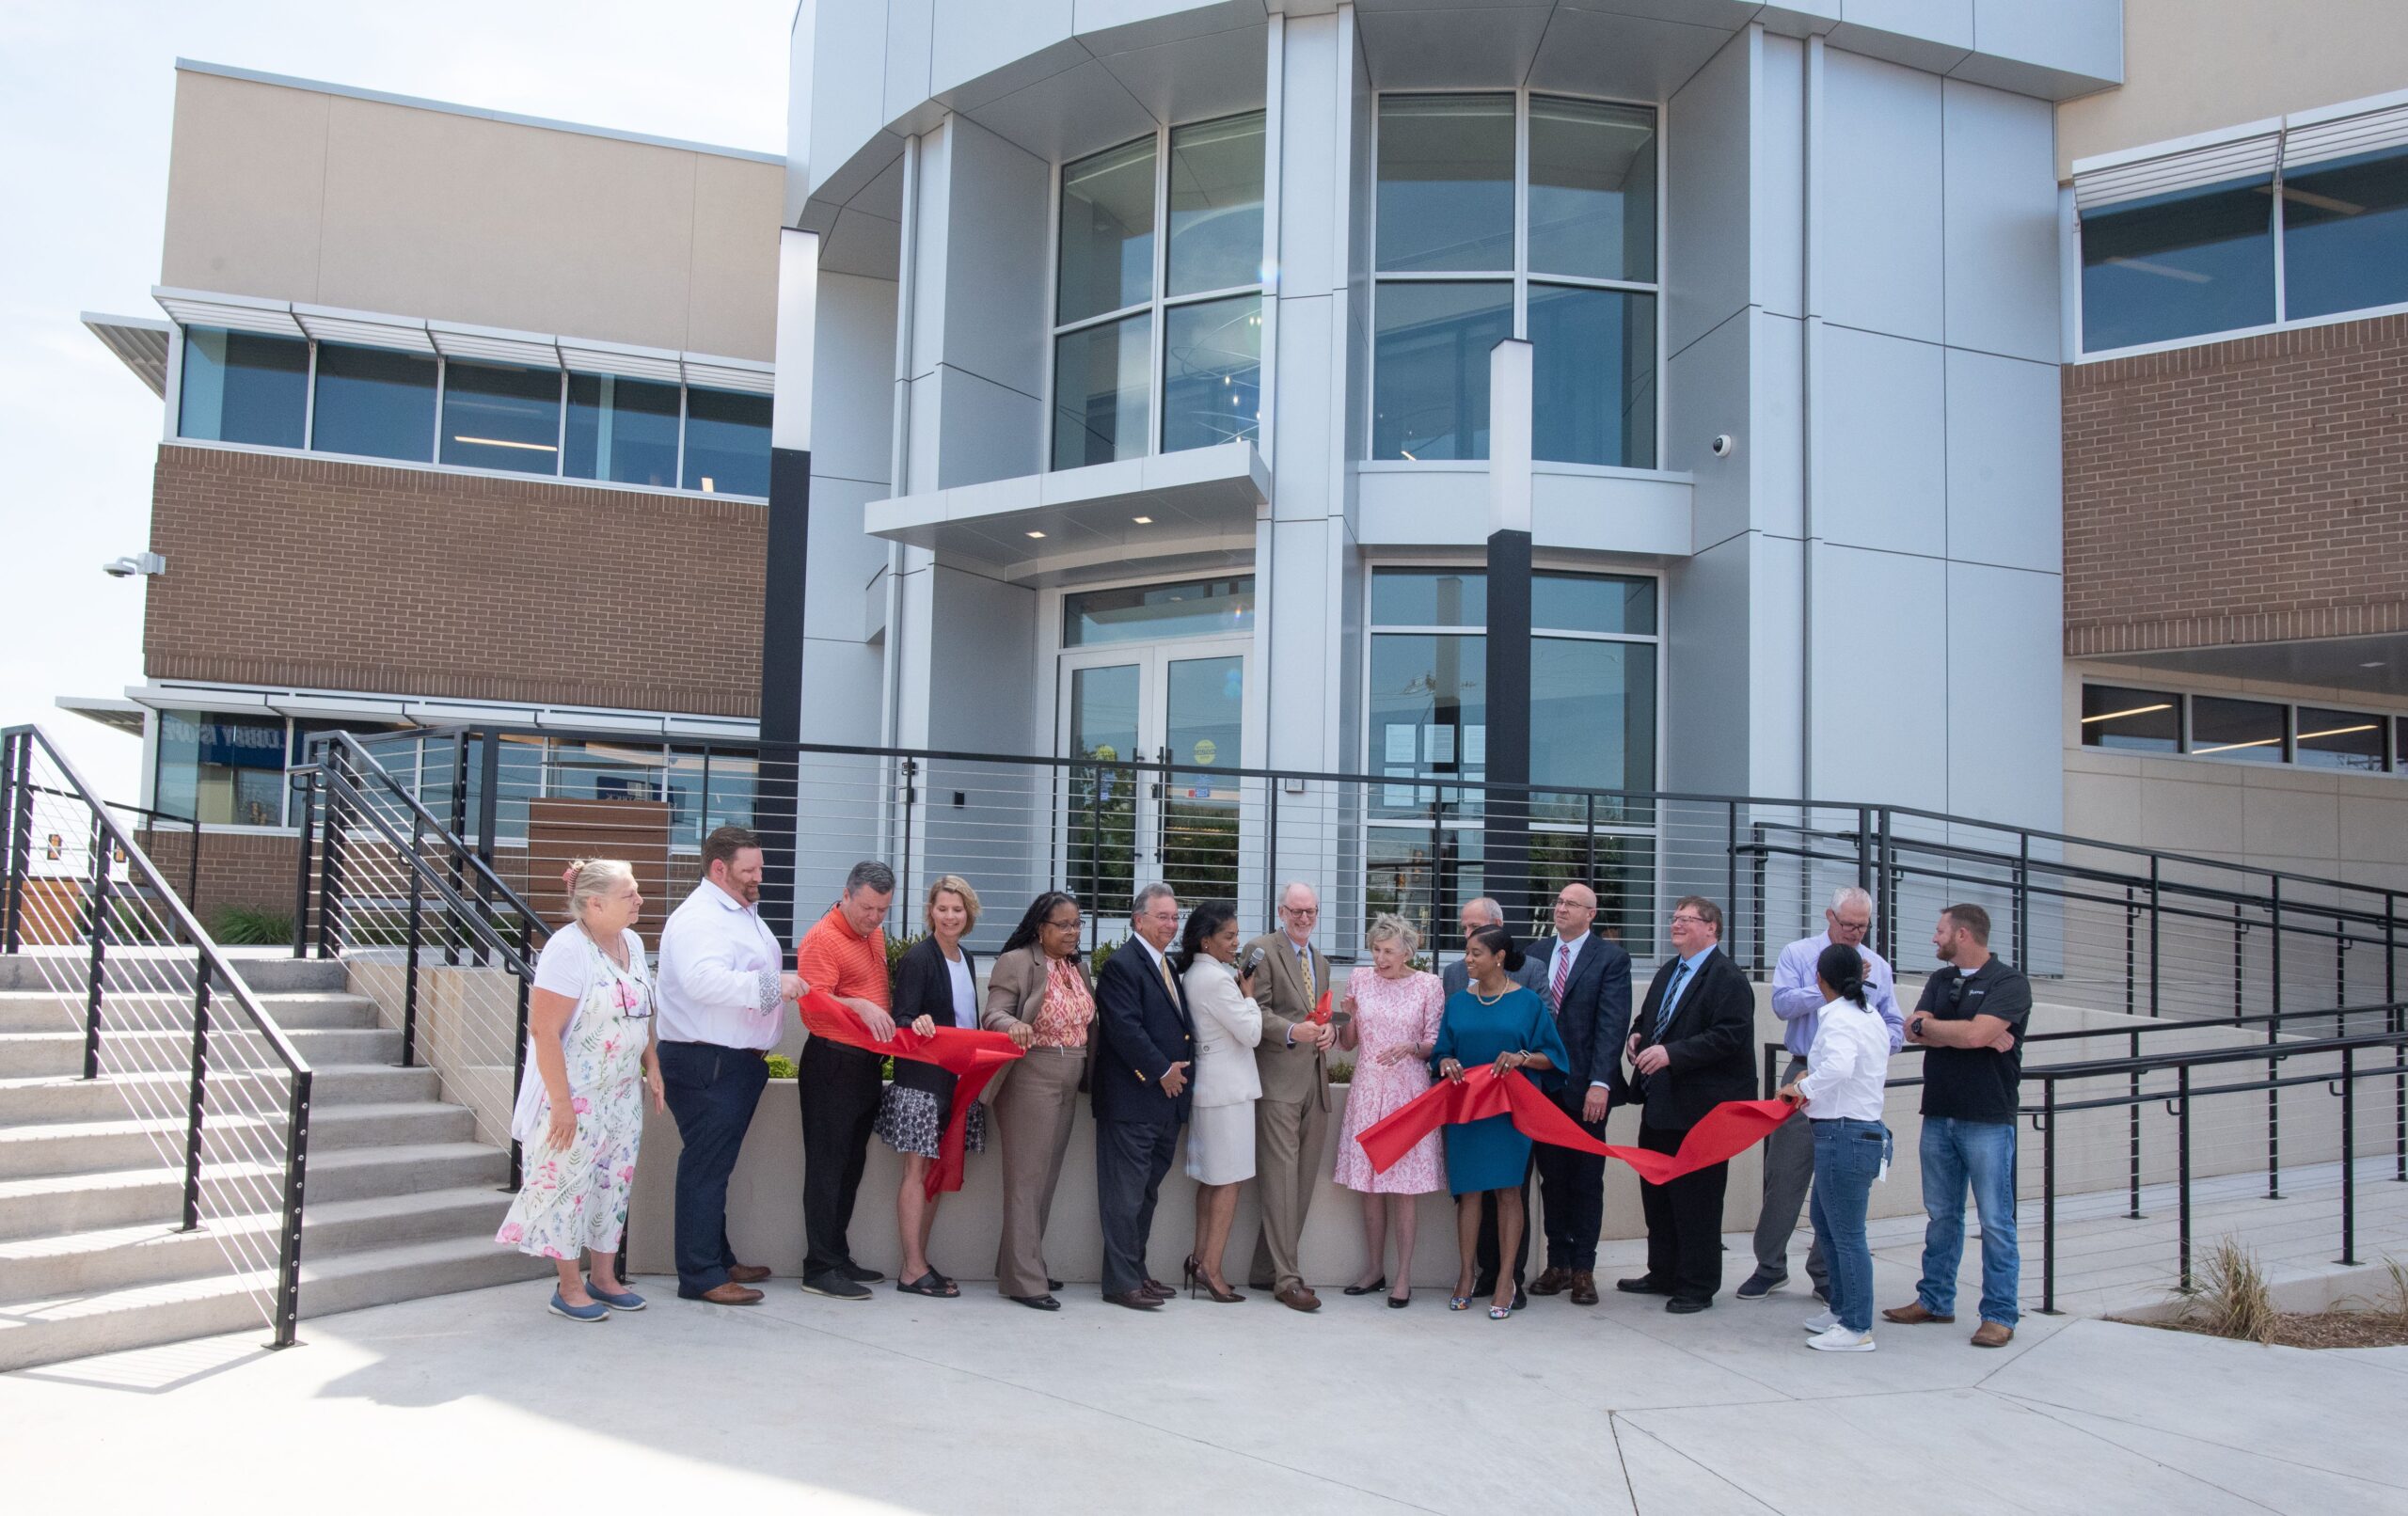 Representatives from the OHFA staff and Board of Trustees are joined by representatives from ADG Blatt and FlintCo in cutting the ribbon on OHFA's remodeled building at 100 N.W. 63rd Street.